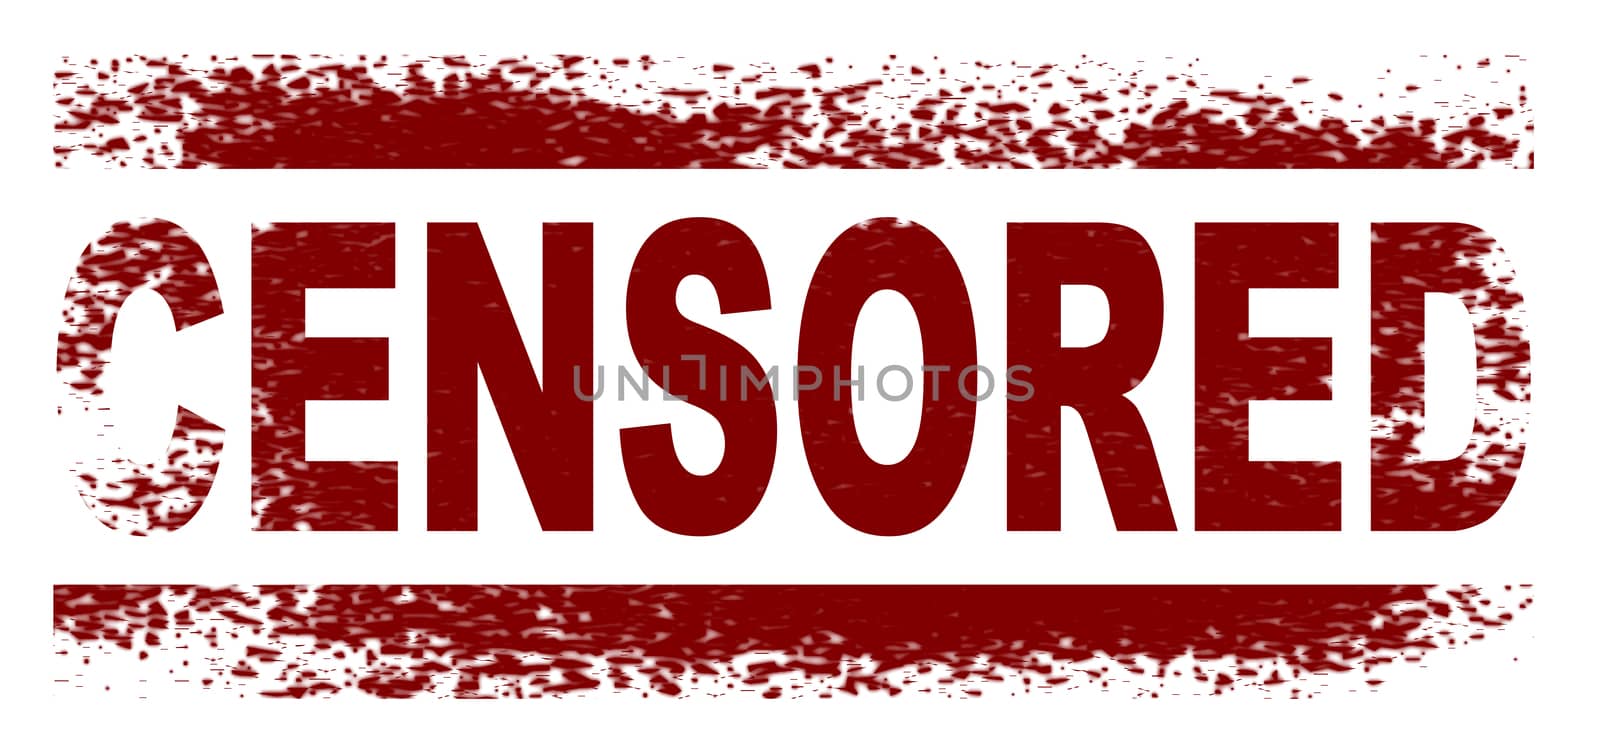 A censored rubber stamp over white with grunge effect